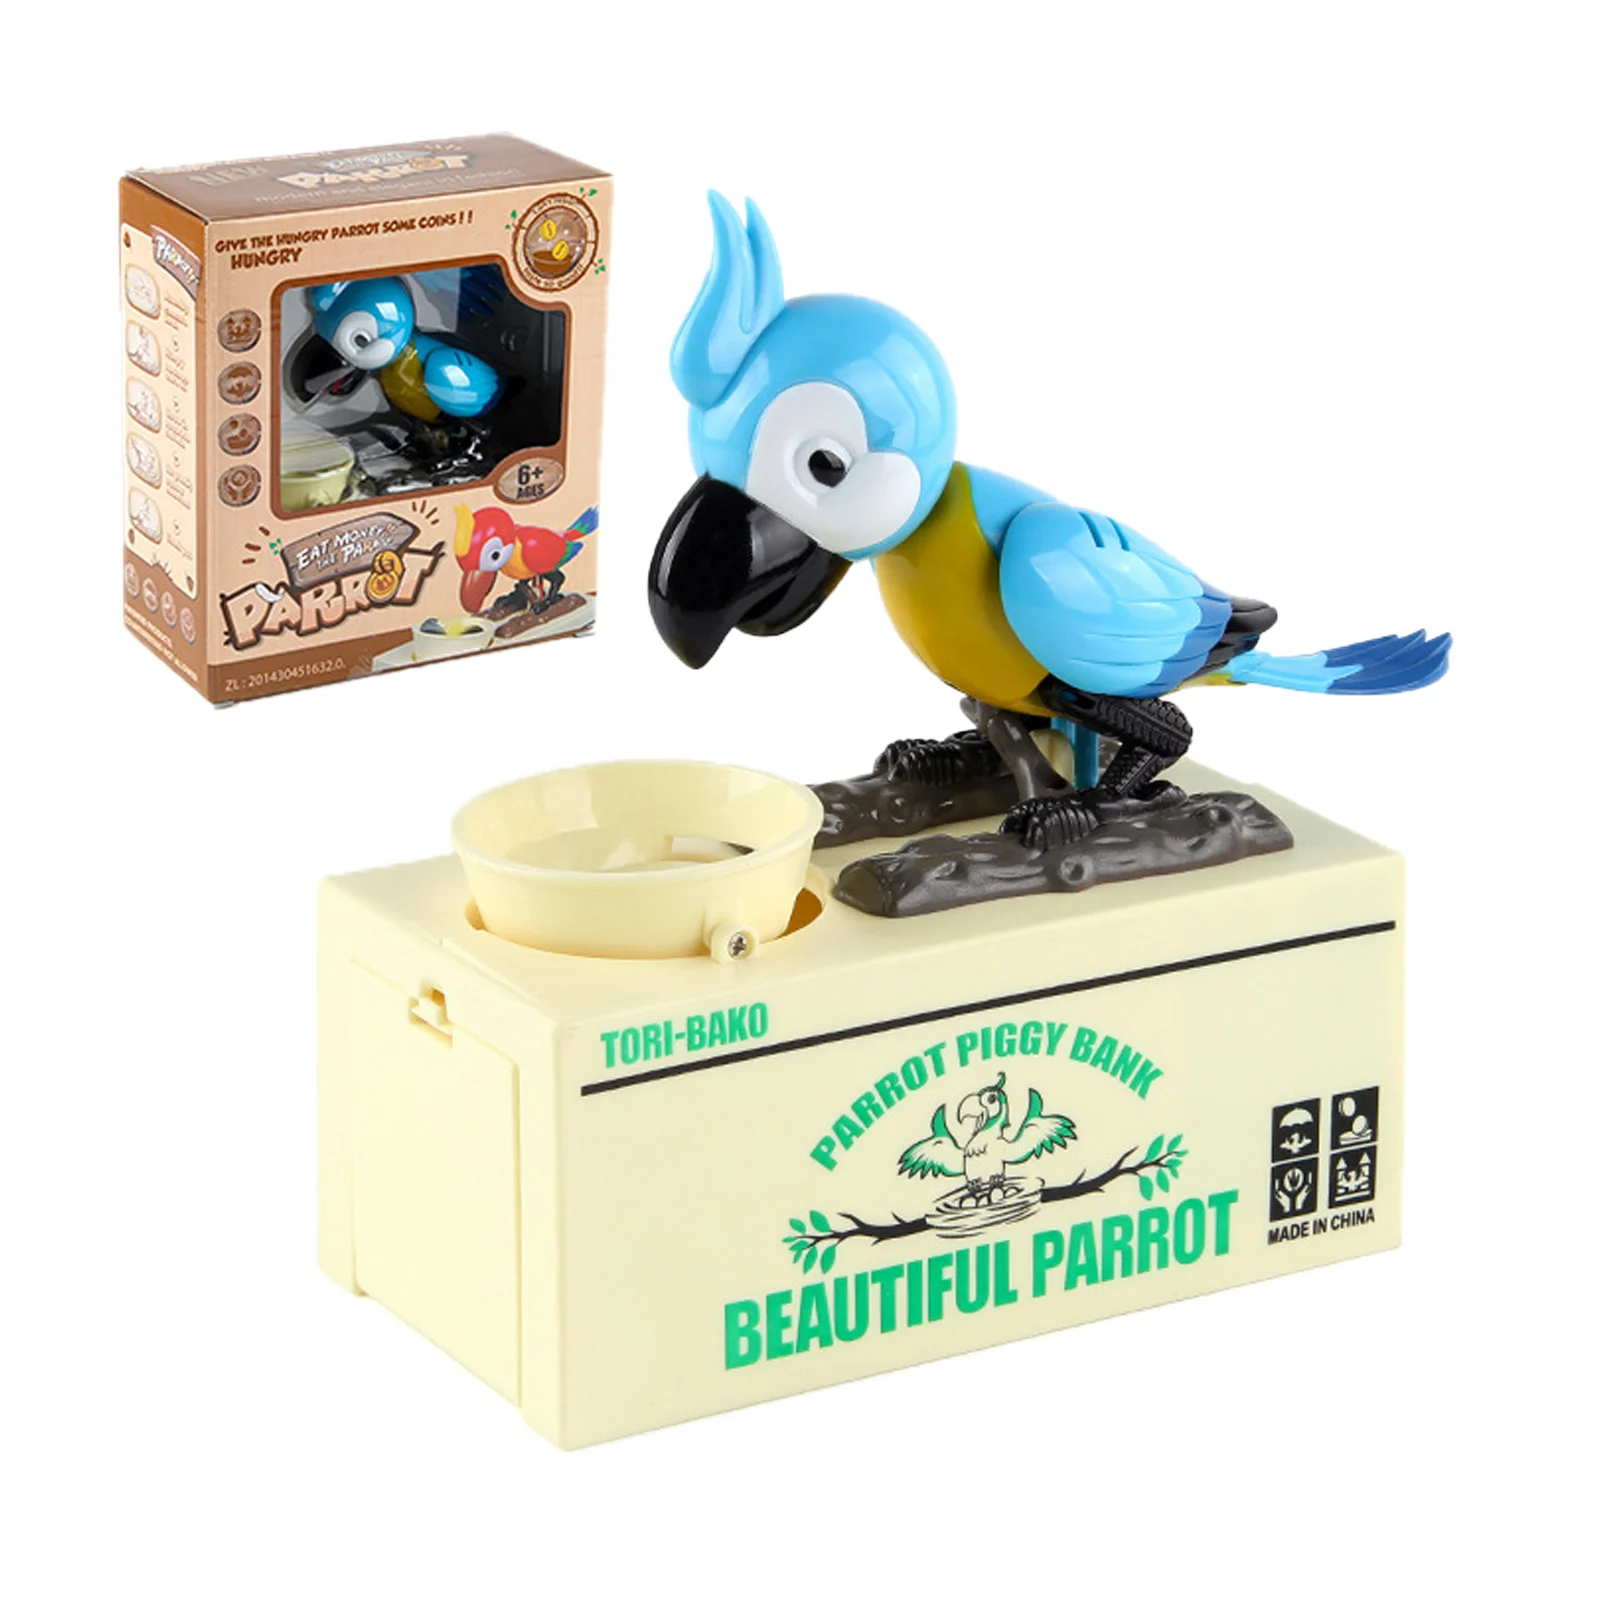 

Parrot Piggy Bank Hungry Parrot Piggy Bank For Stealing Eating Coin Money Penny Cents Battery Powered Robotic Coin Munching Toy